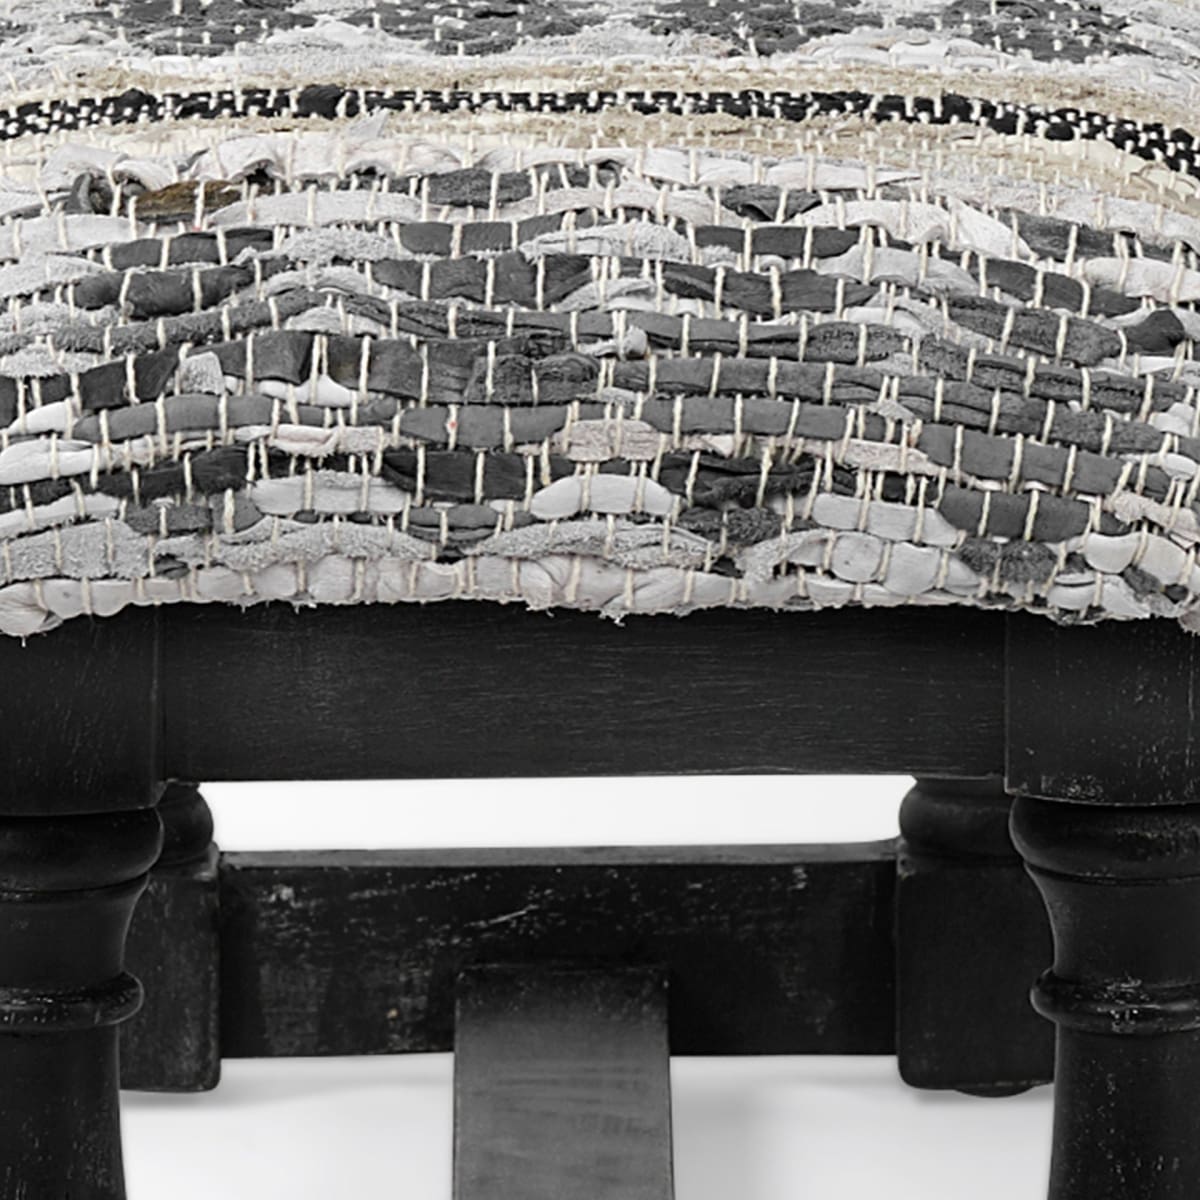 Denison Bench Woven Leather | Black Wood - benches